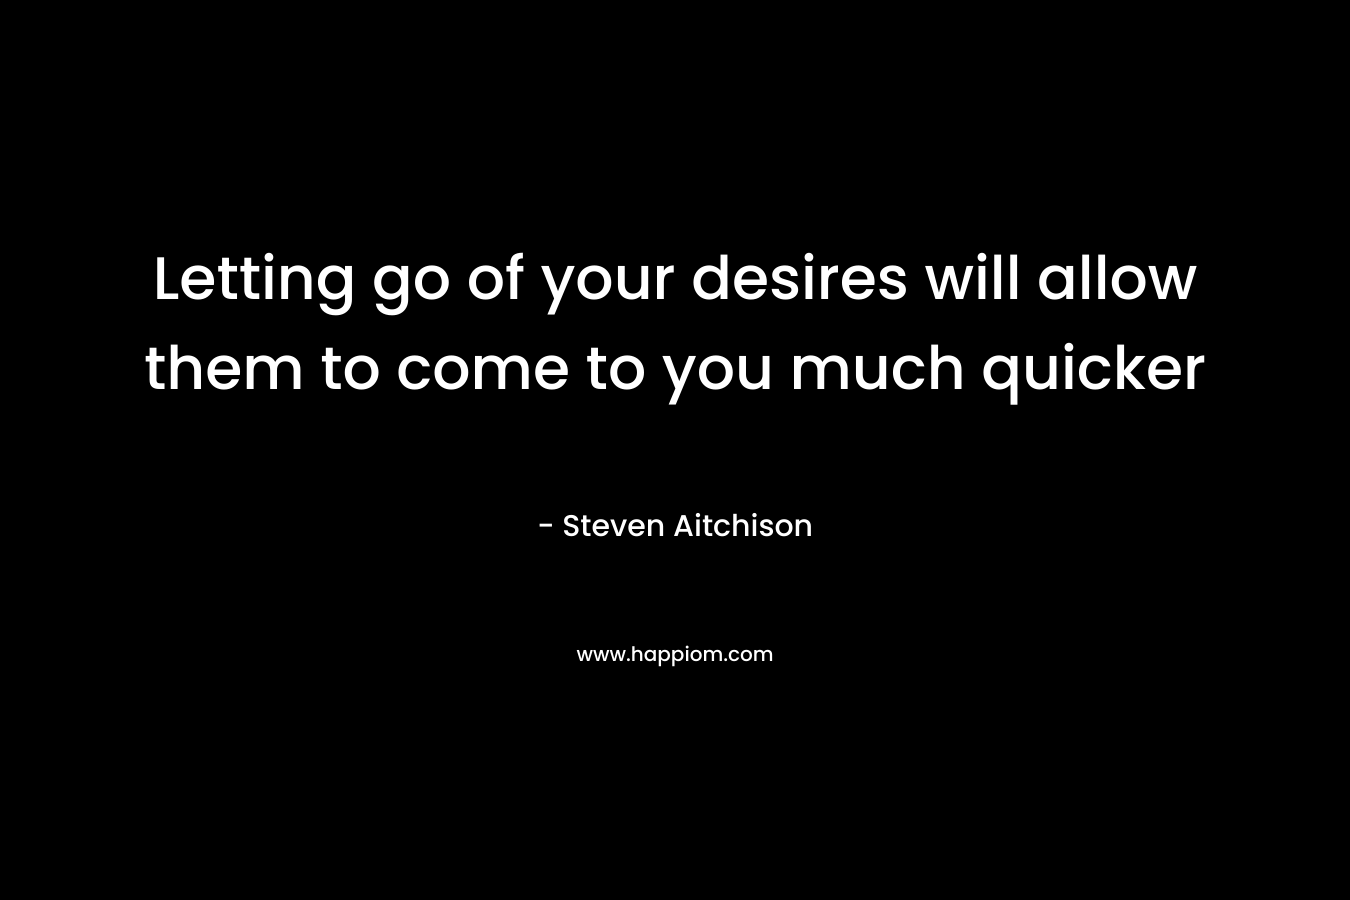 Letting go of your desires will allow them to come to you much quicker – Steven Aitchison